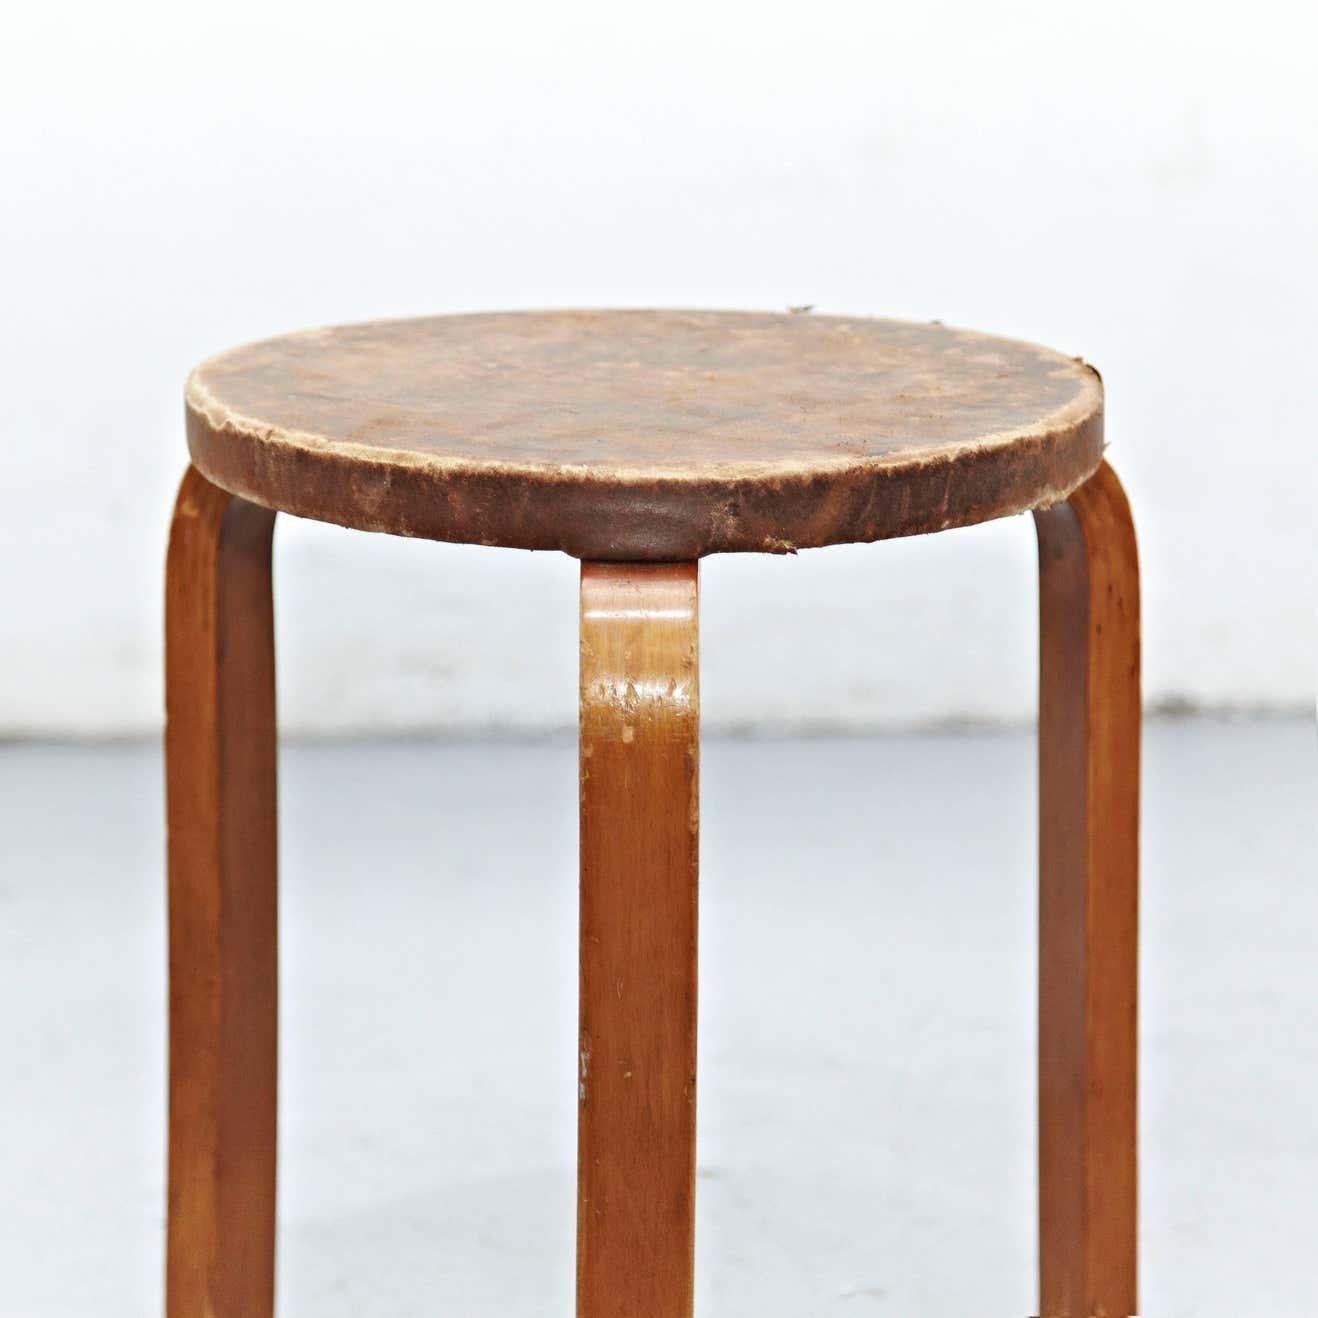 Stool designed by Alvar Aalto, circa 1960.
Manufactured by Artek, (Finland)
Leather top, wood legs and structure.

In great original condition, with minor wear consistent with age and use in the structure some broken leather top, preserving a